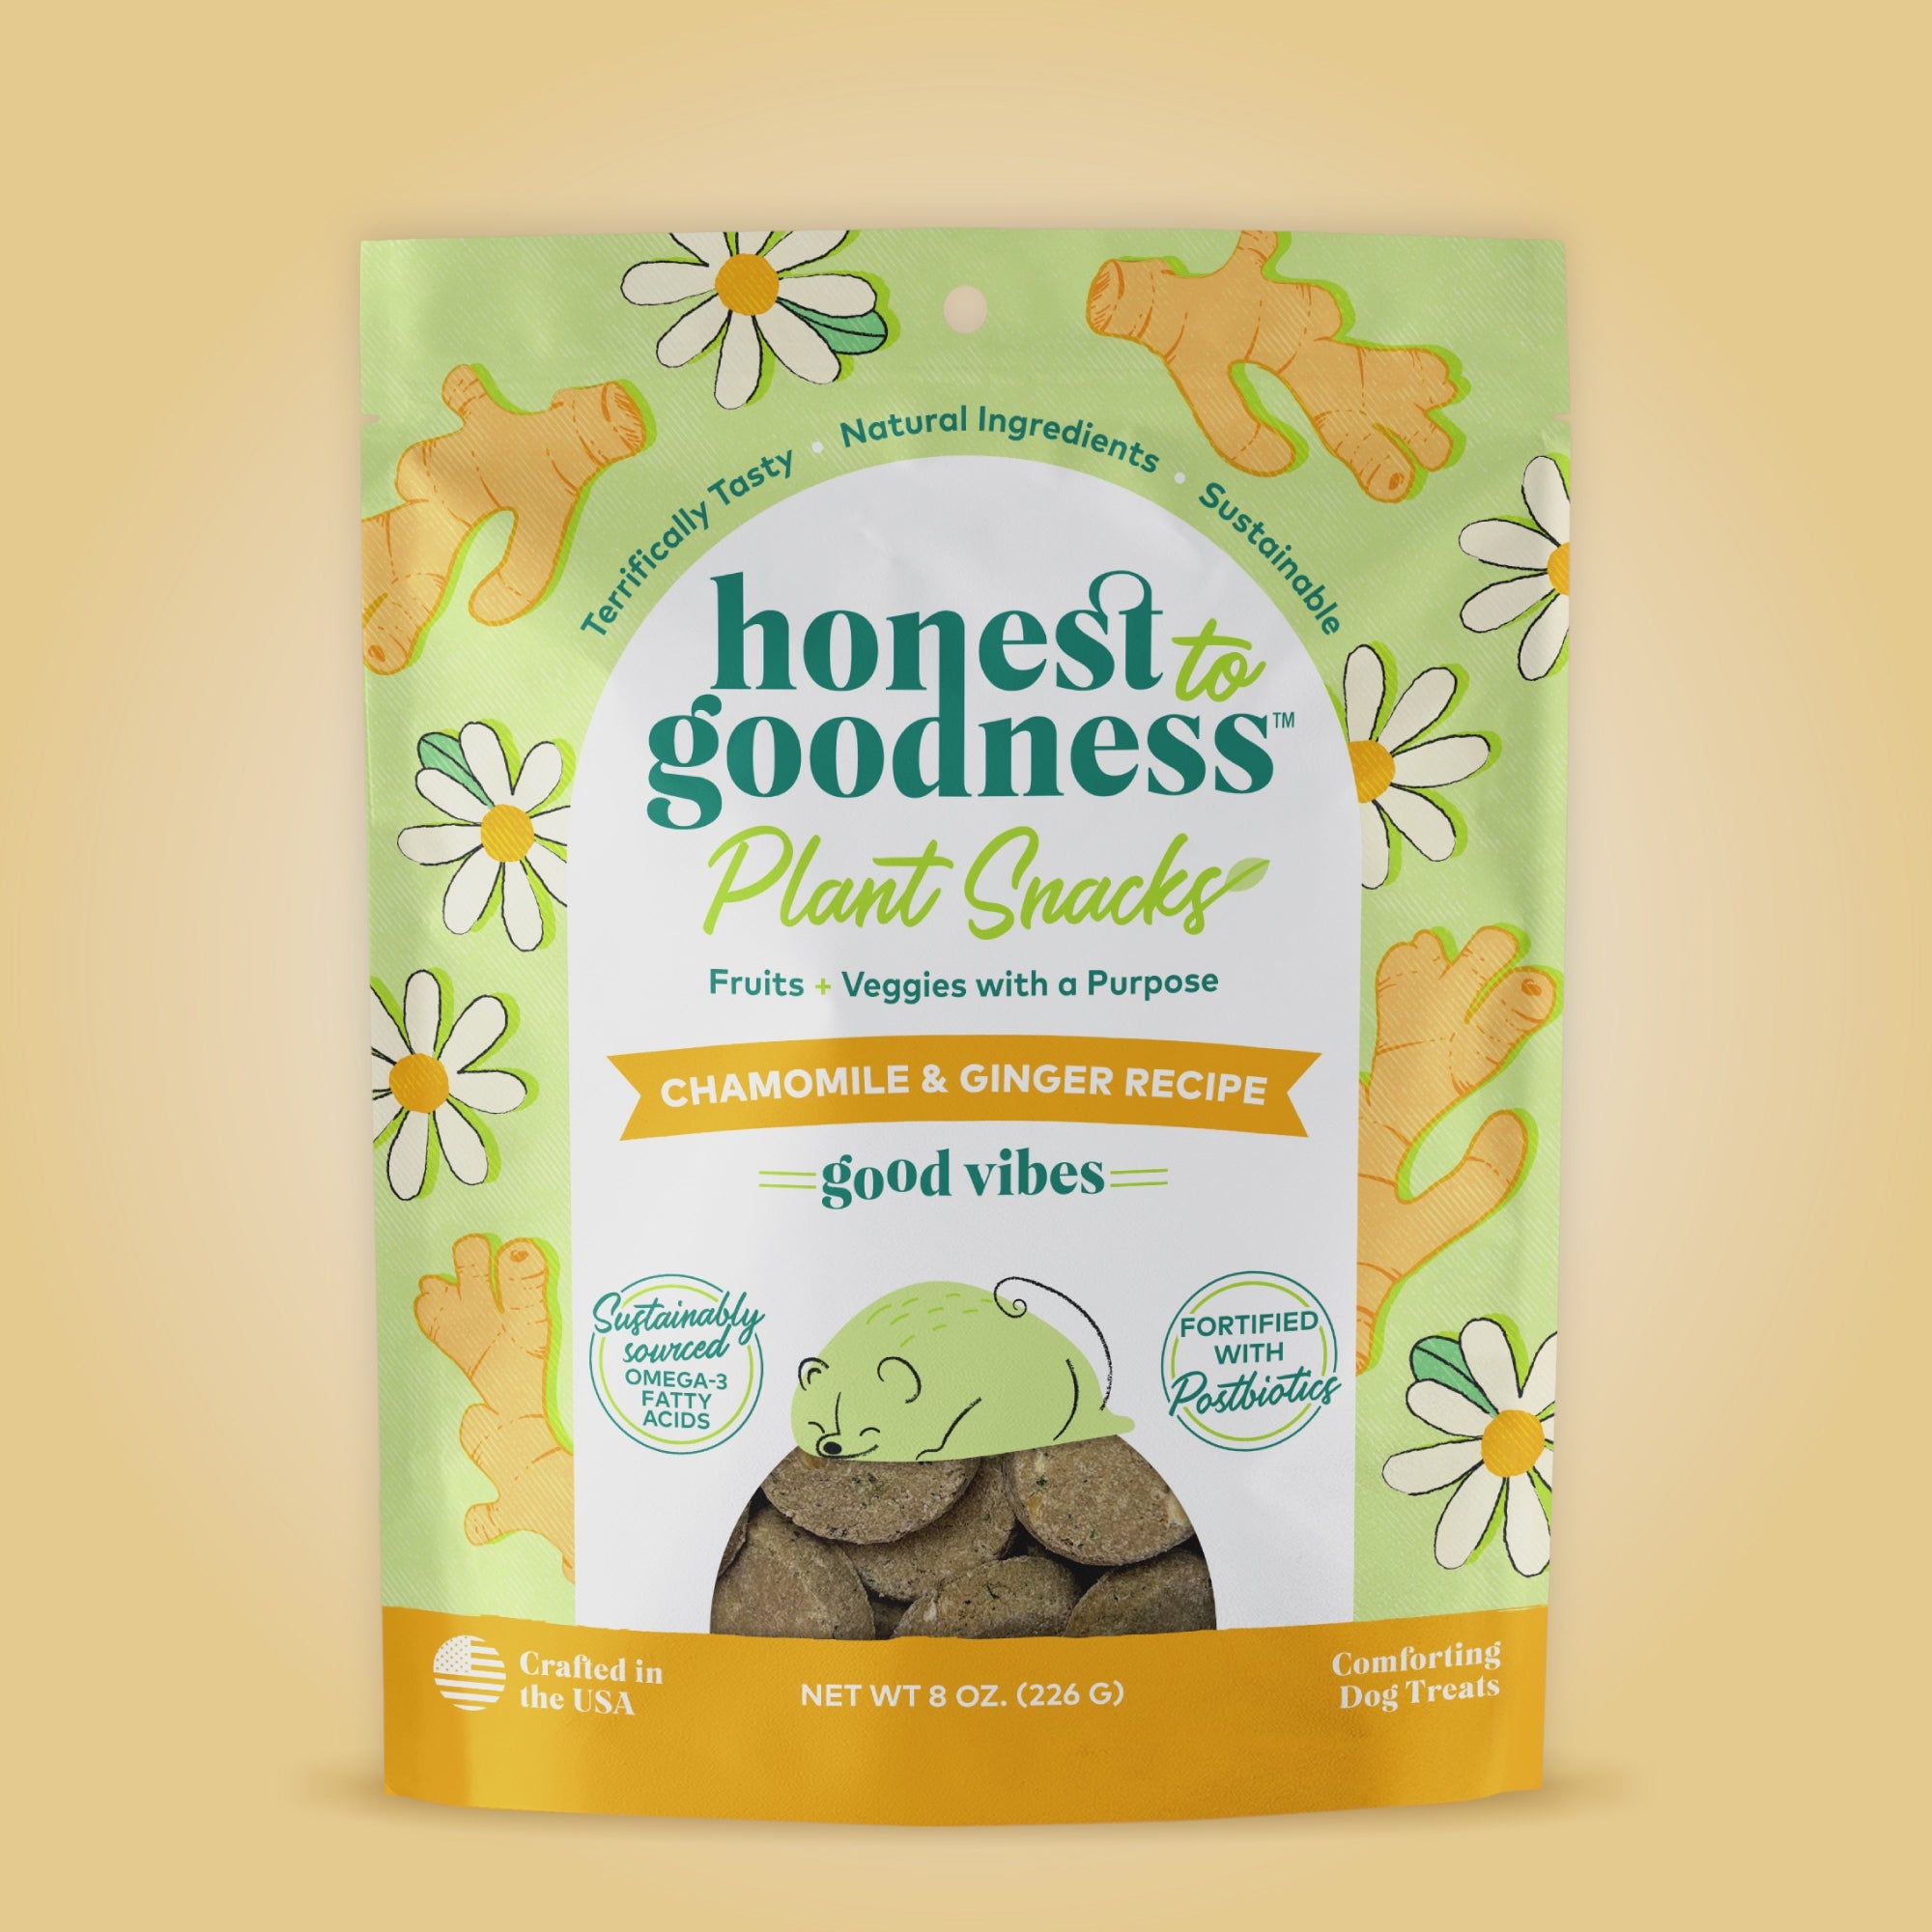 Short video of the ingredients that go into making Honest to Goodness plant snacks for dogs.